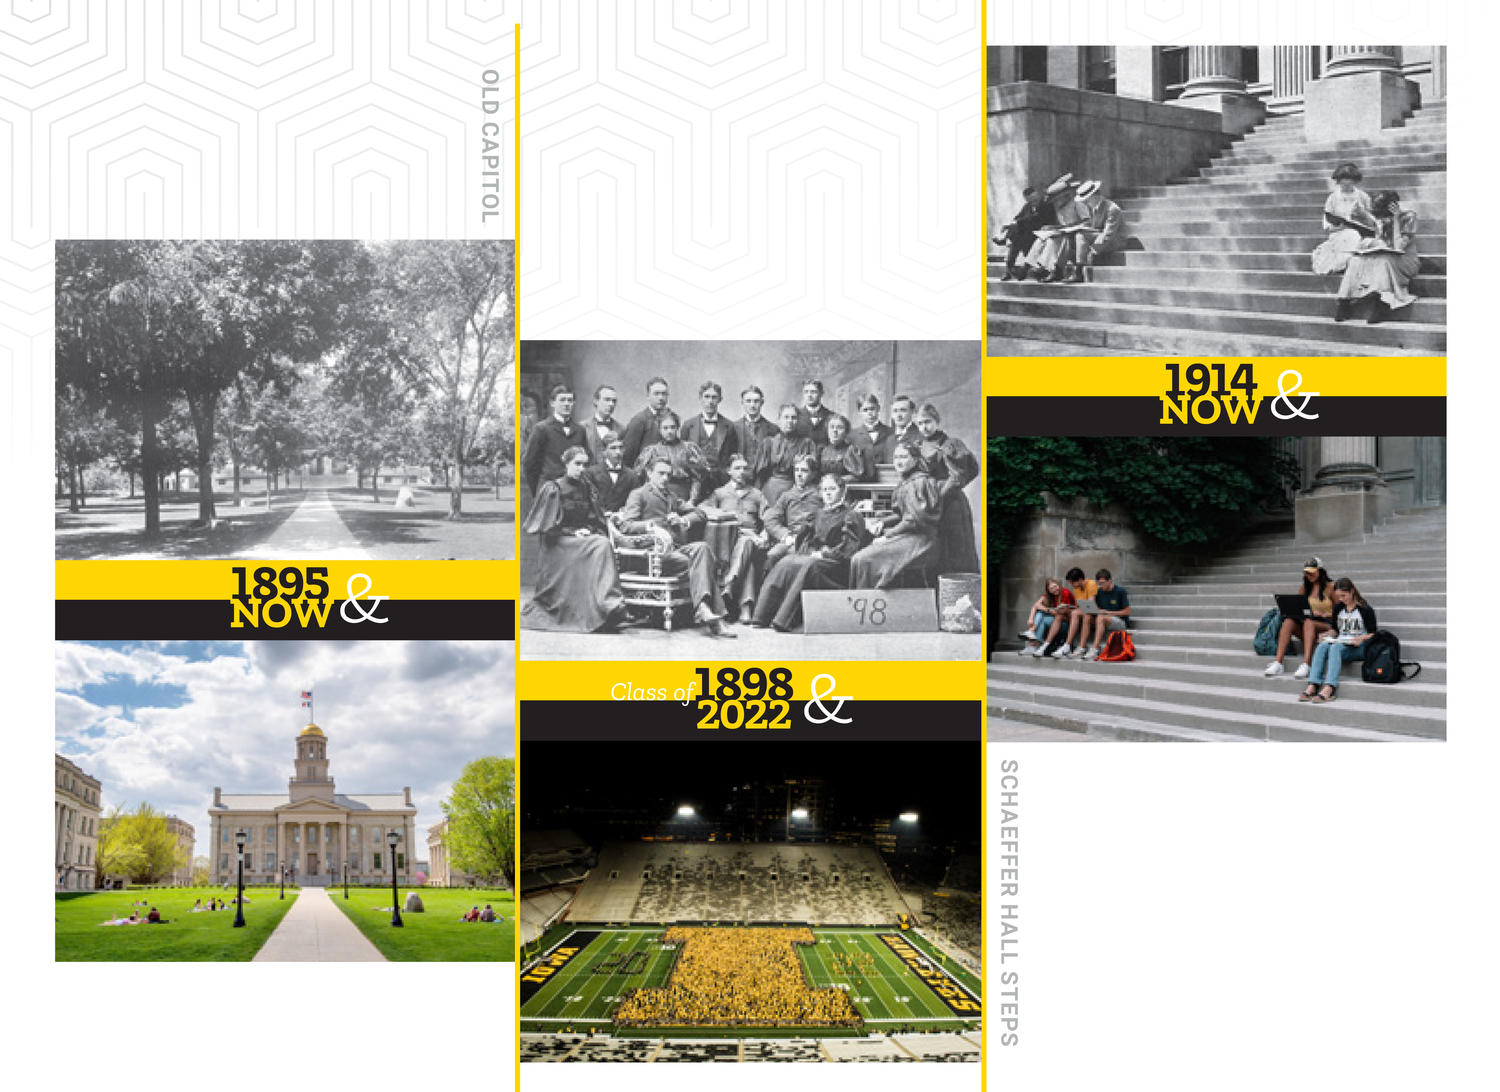 Then and now pictures of campus 1